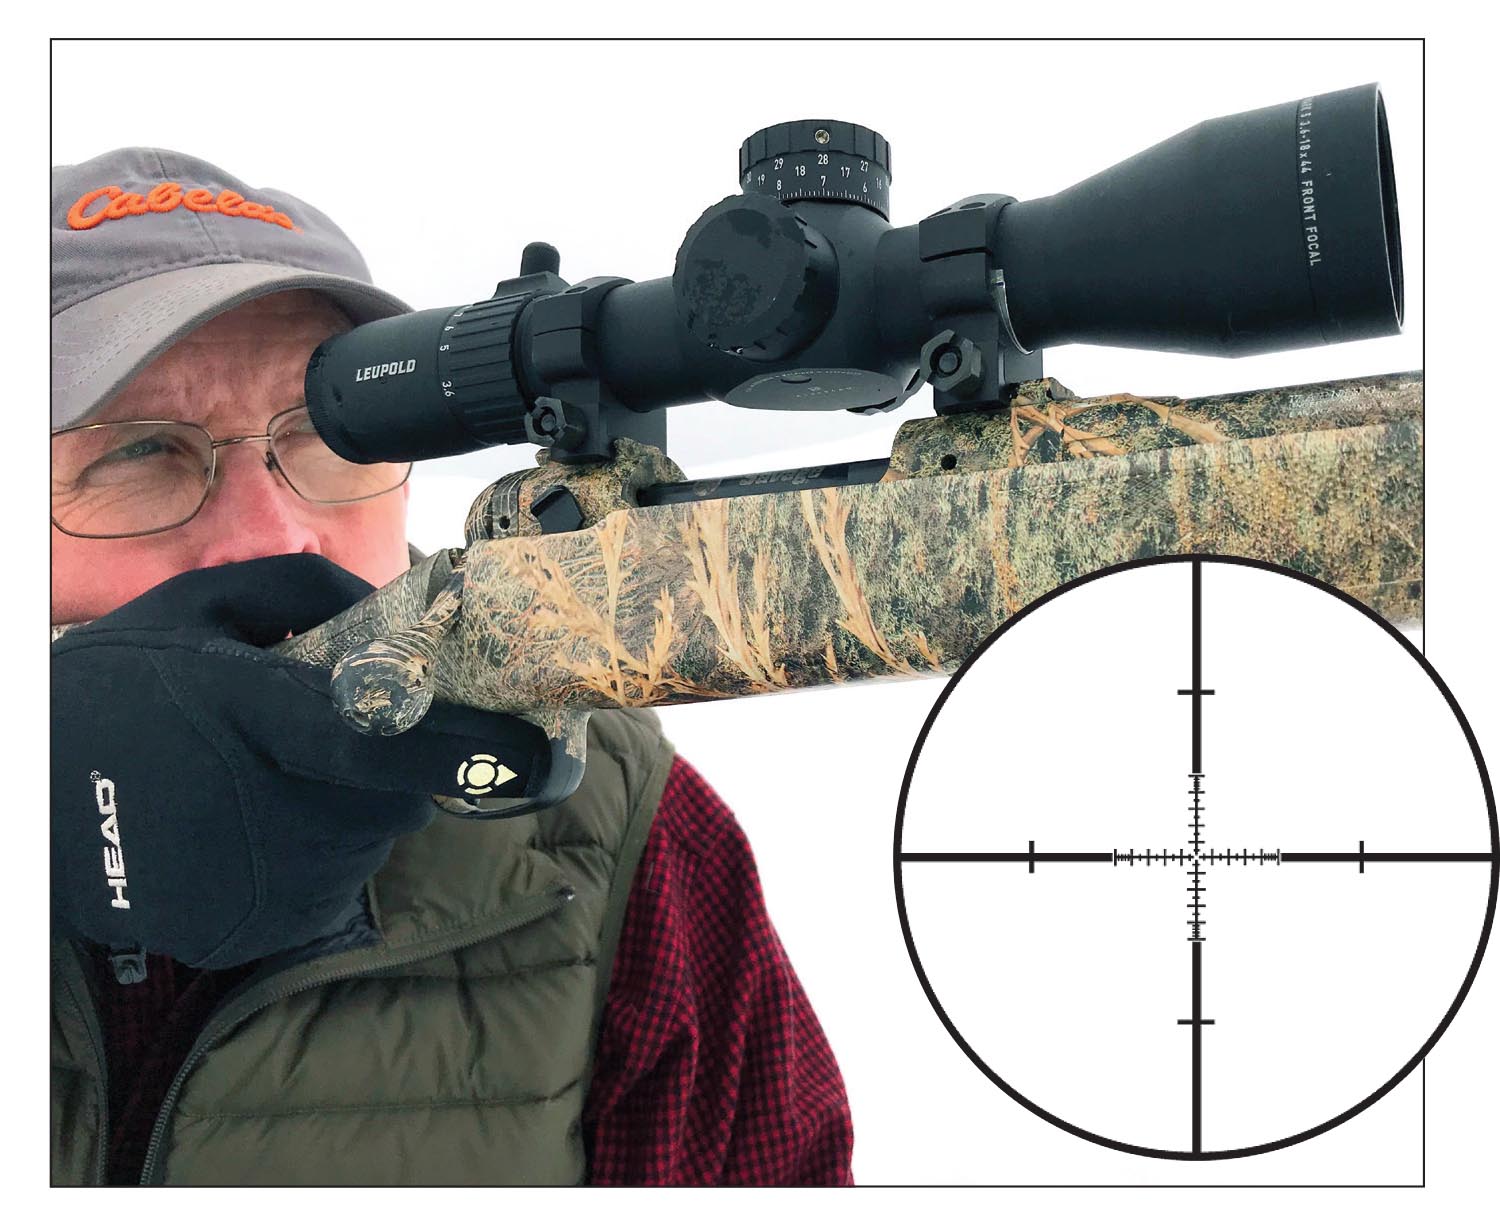 The Leupold Mark 5HD 3.6-18x 44mm scope with Tactical Milling Reticle, measuring roughly 12 inches in length, fits well on a short-action rifle.